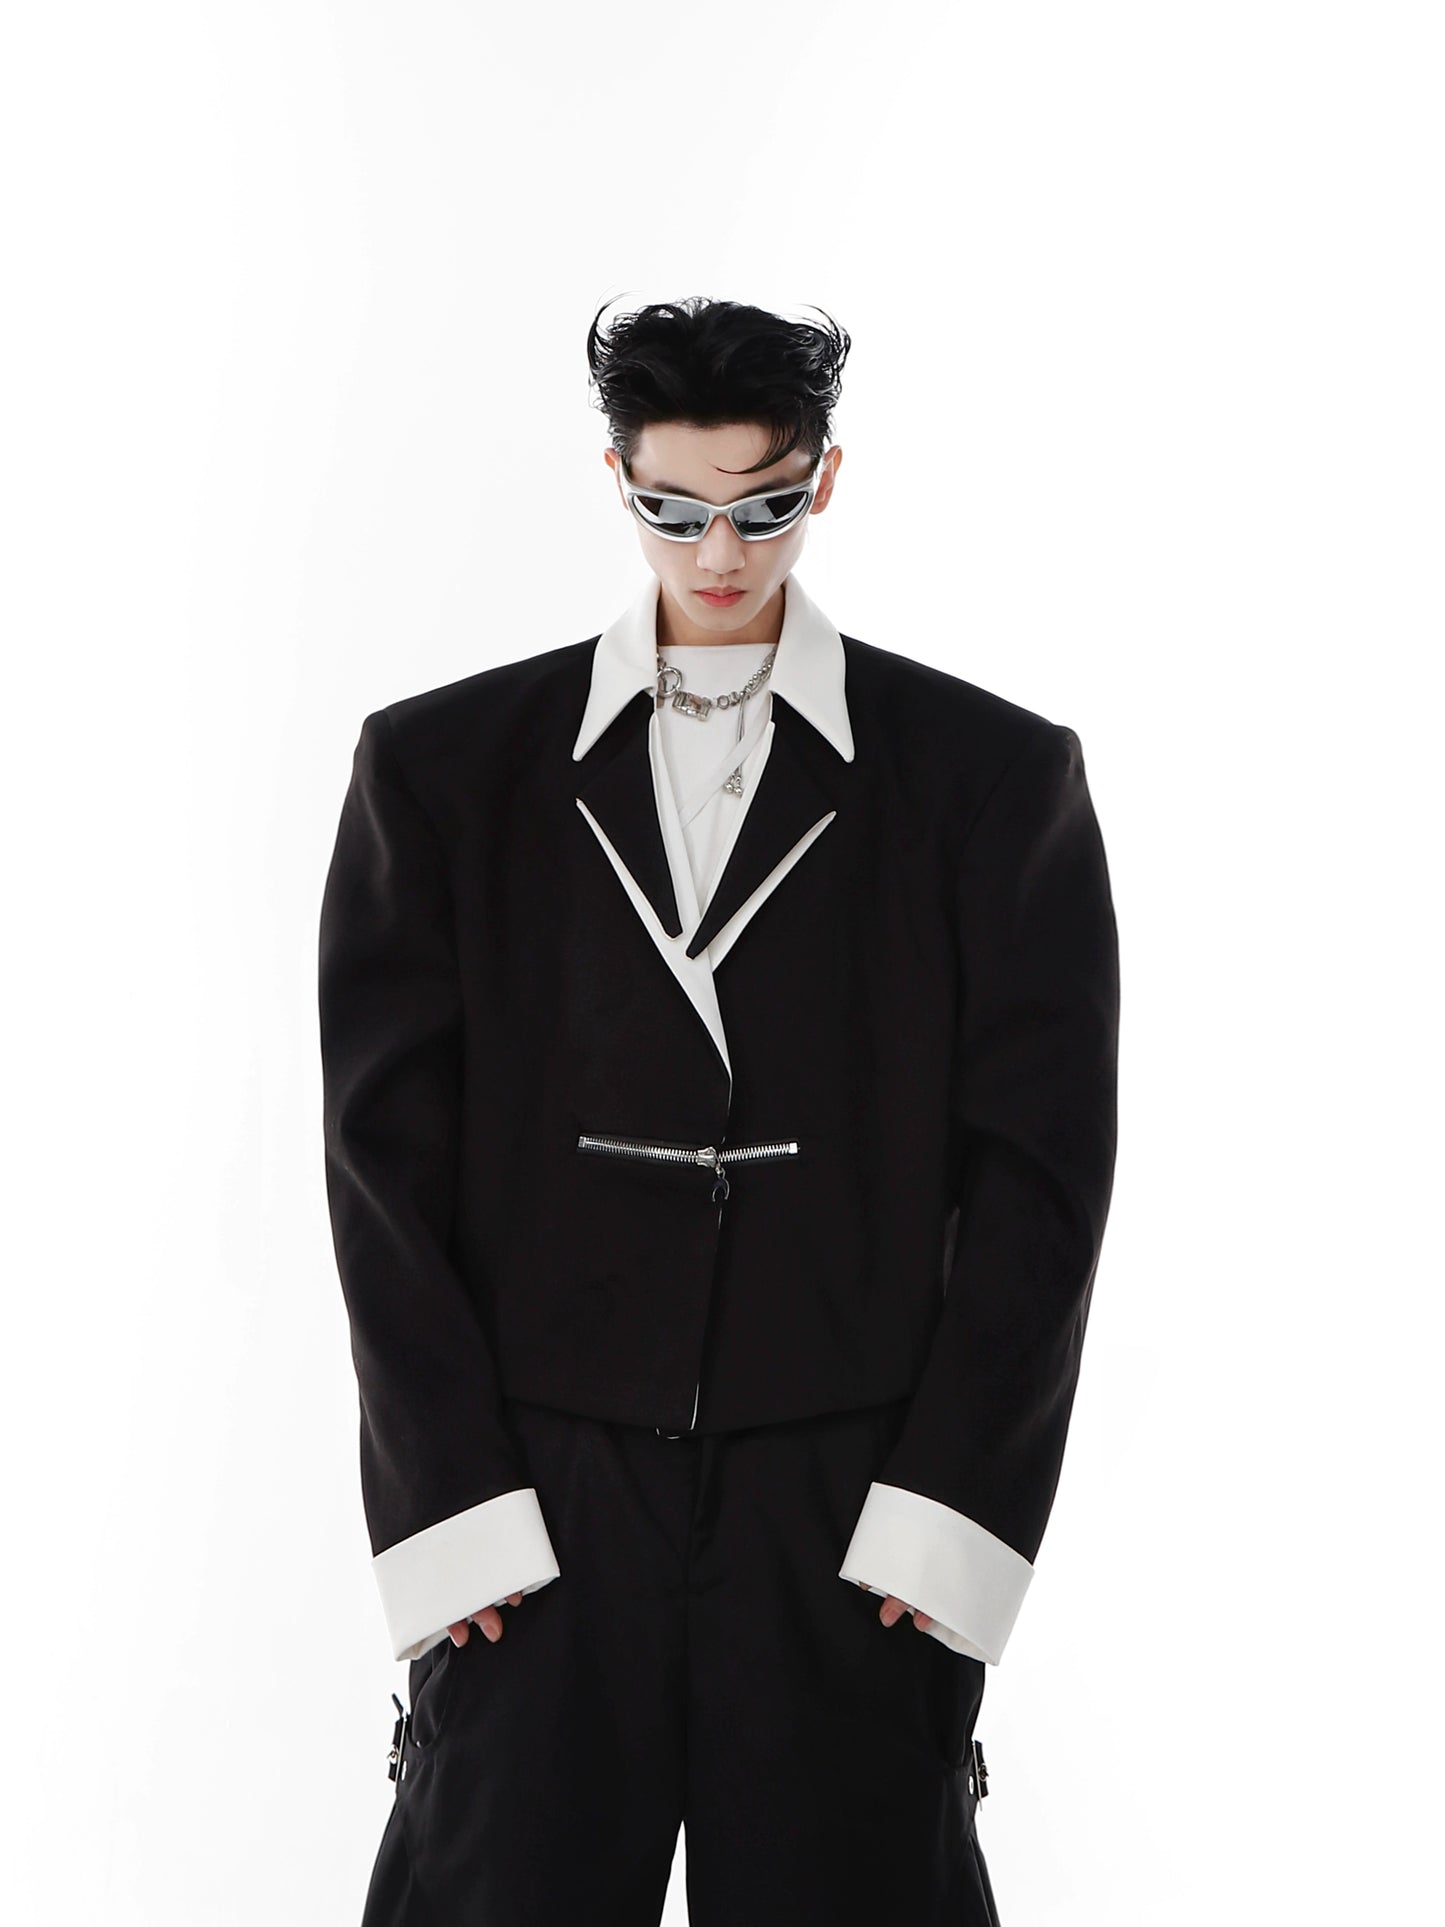 CulturE is a niche deconstructed black and white contrasting padded shoulder cropped blazer with a metal zipper